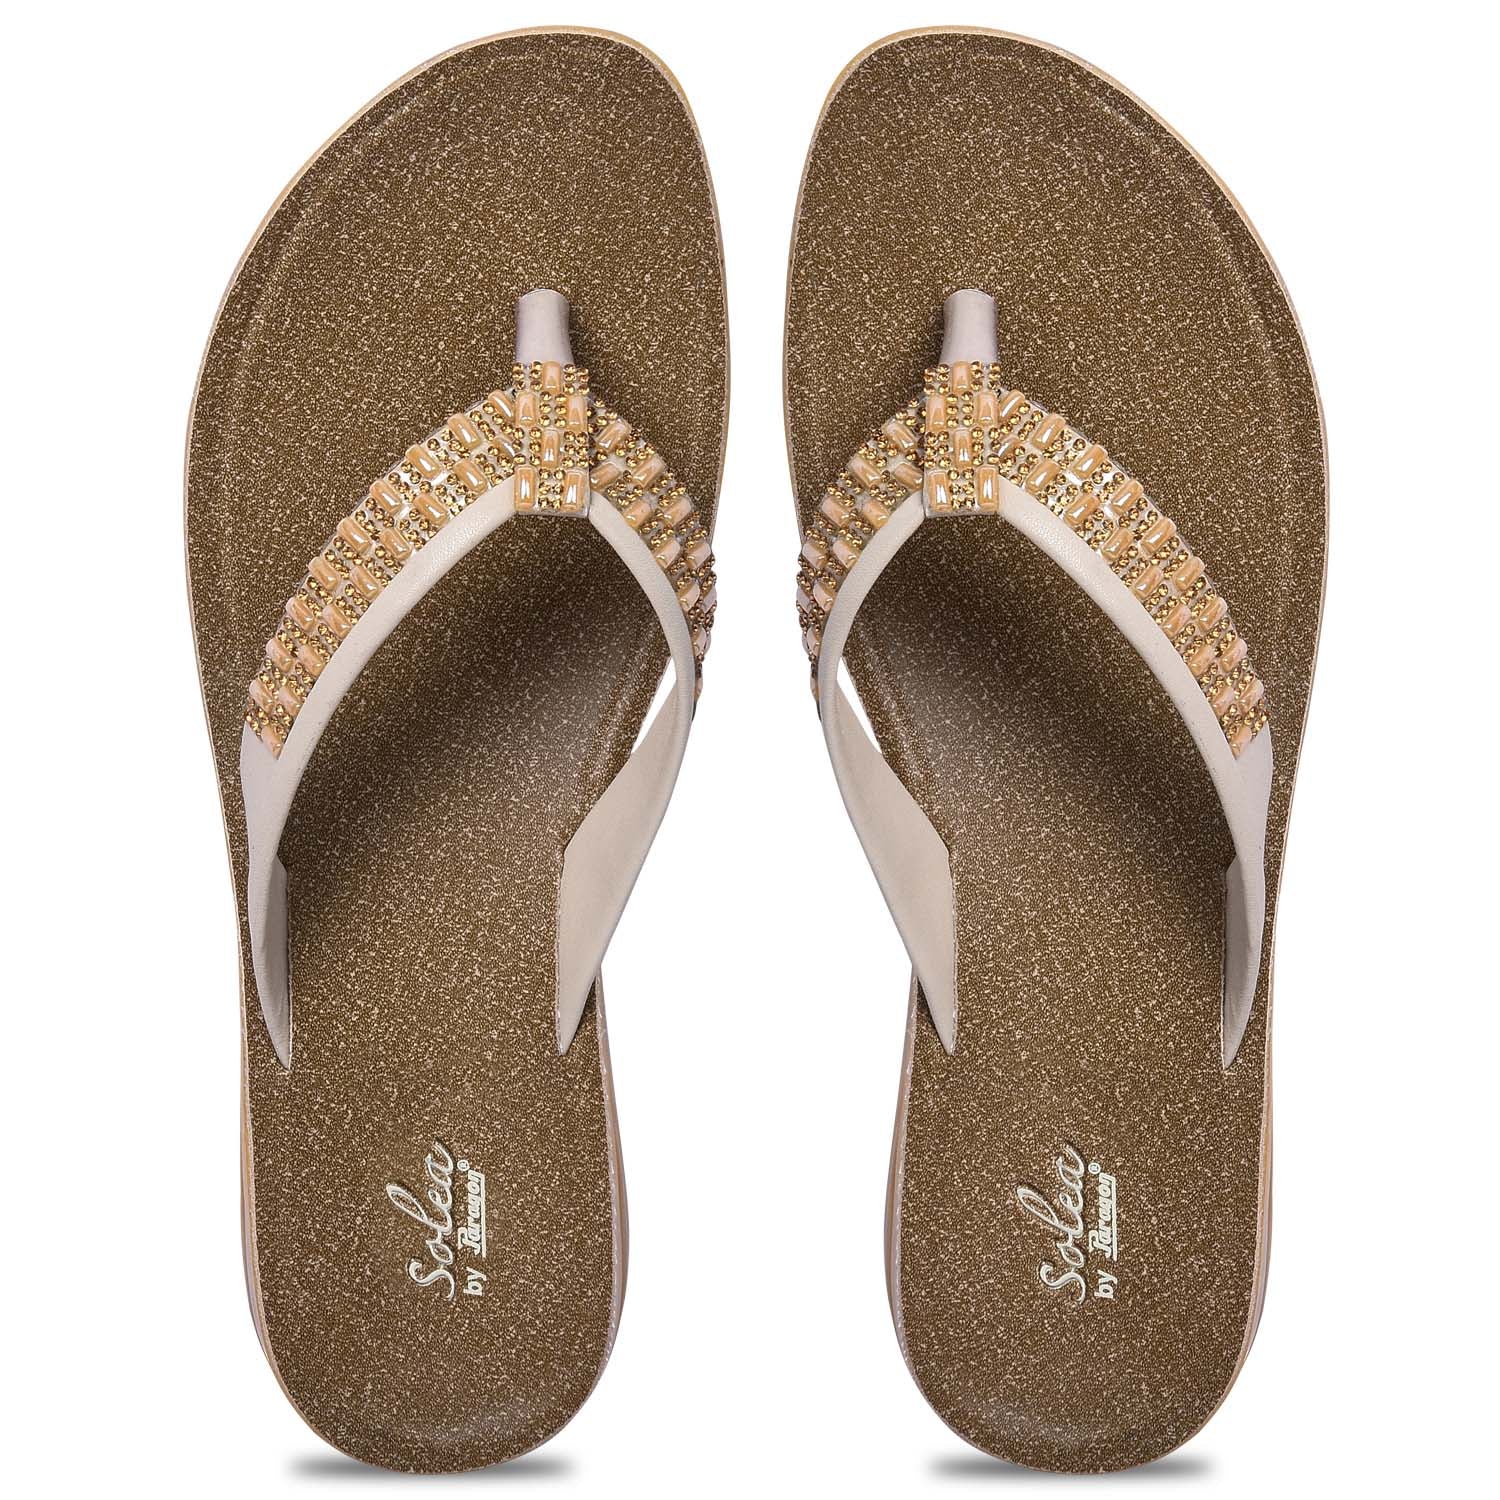 Paragon R90251L Women Sandals | Casual &amp; Formal Sandals | Stylish, Comfortable &amp; Durable | For Daily &amp; Occasion Wear